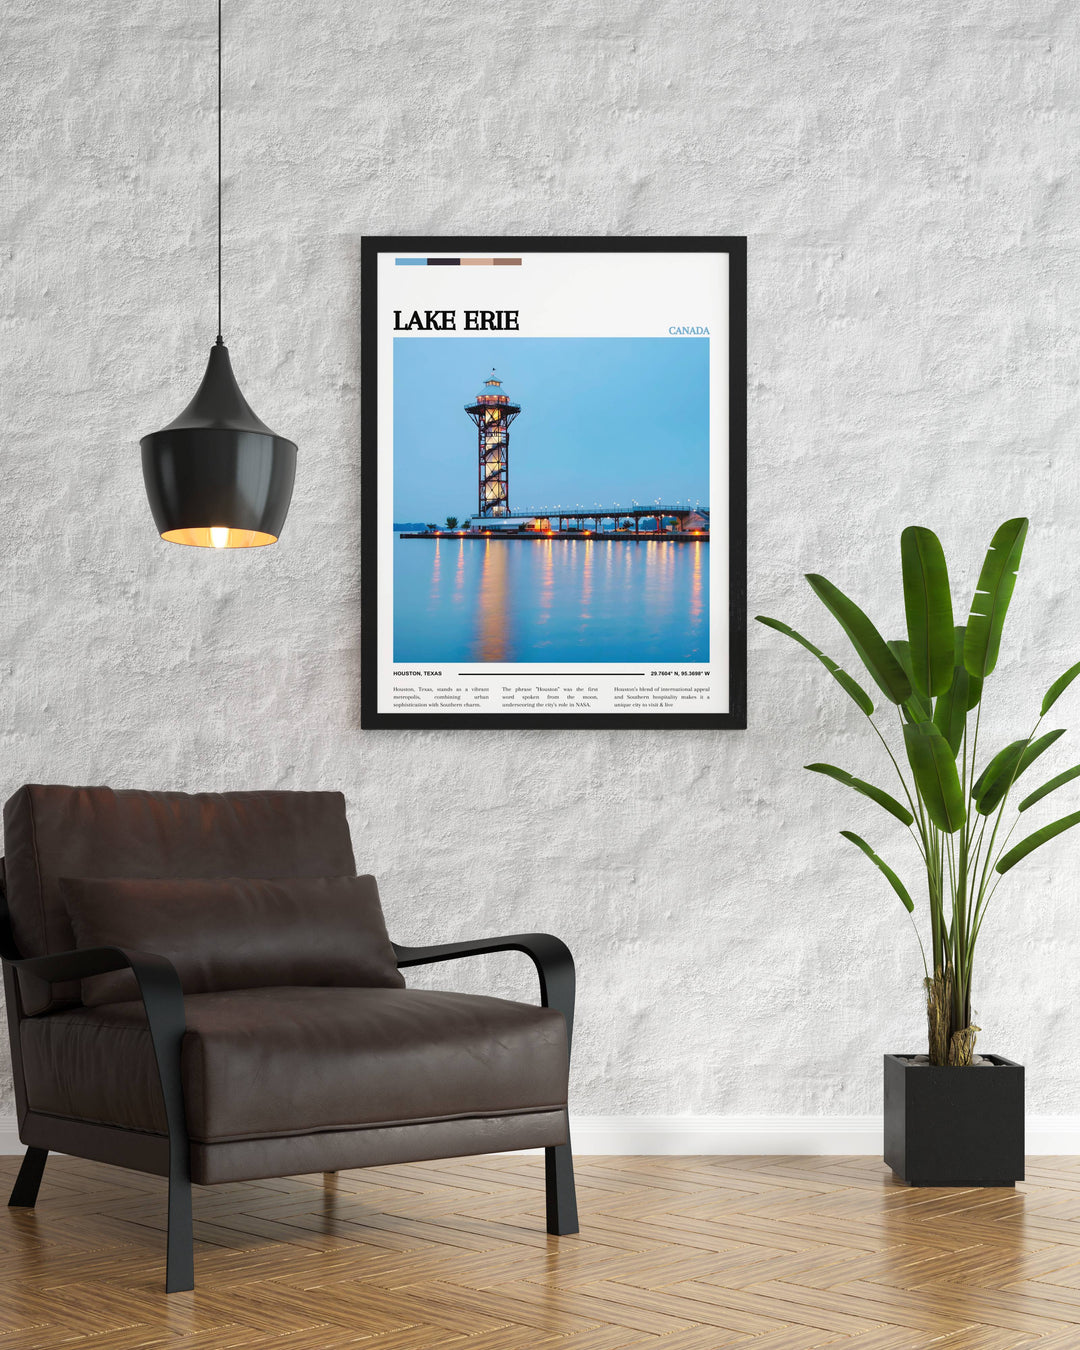 Anniversary gift option: Lake Erie print with romantic sunset view, great for celebrating special moments